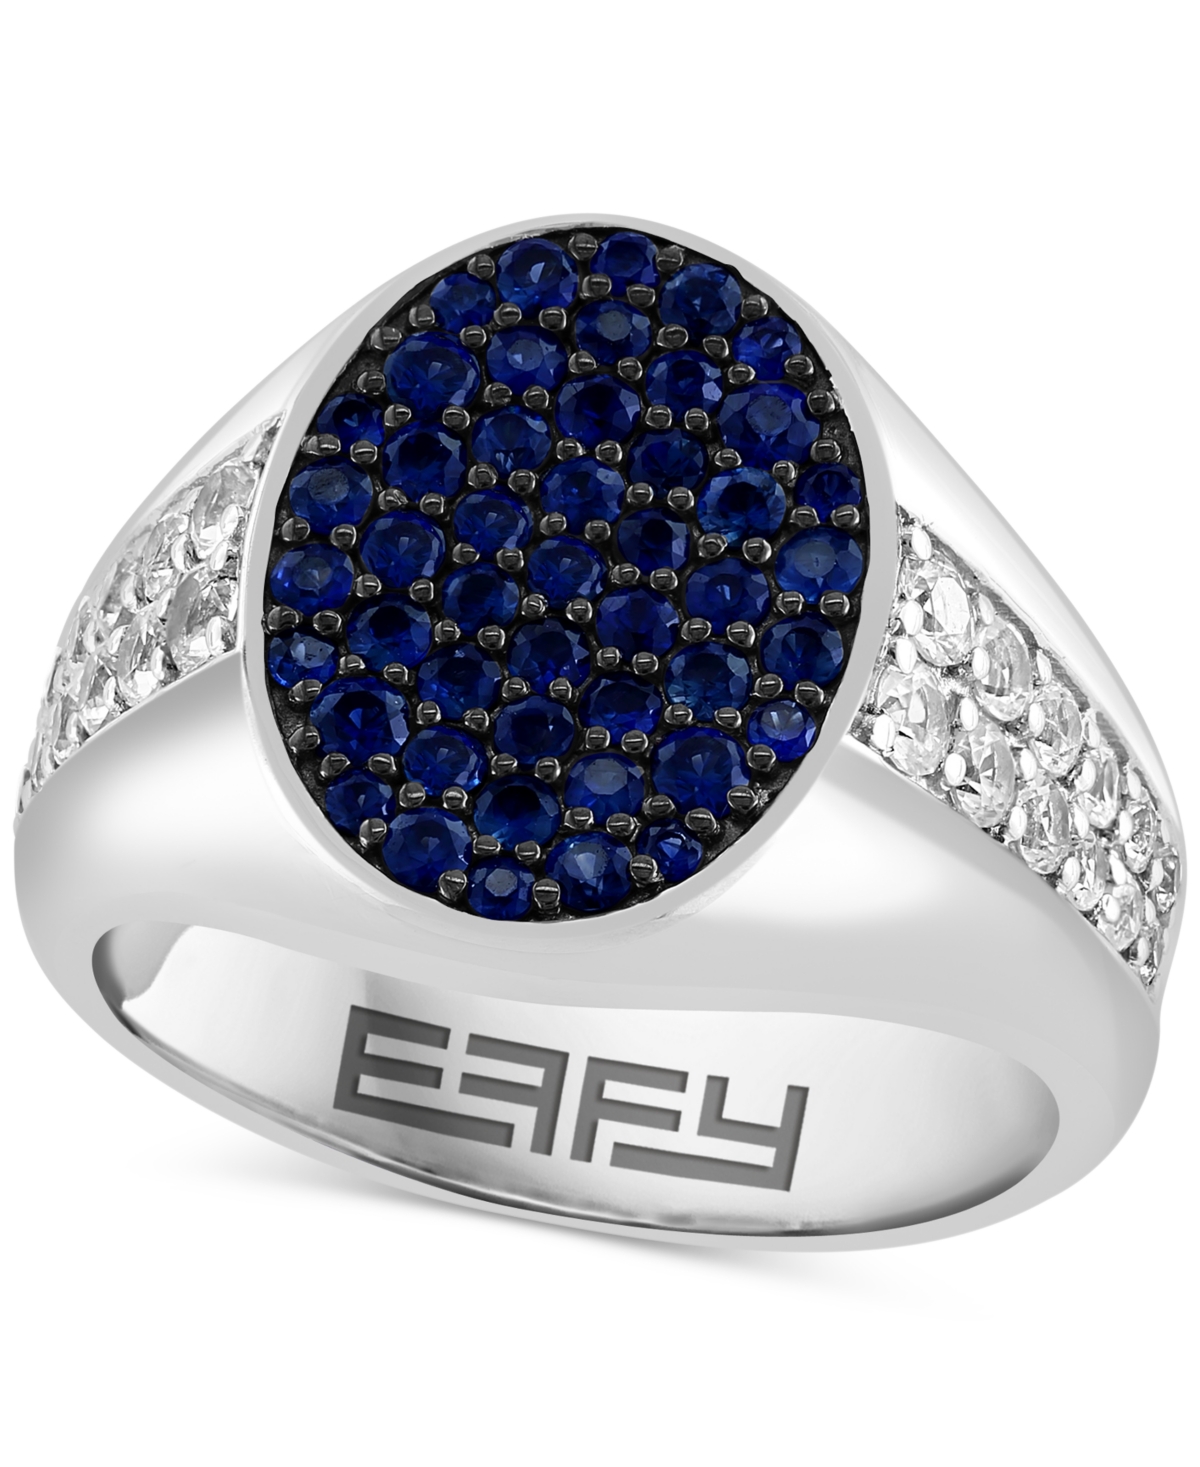 Effy Men's Sapphire (1-1/5 ct. t.w.) & White Sapphire (1 ct. t.w.) Cluster Ring in Sterling Silver - Silver